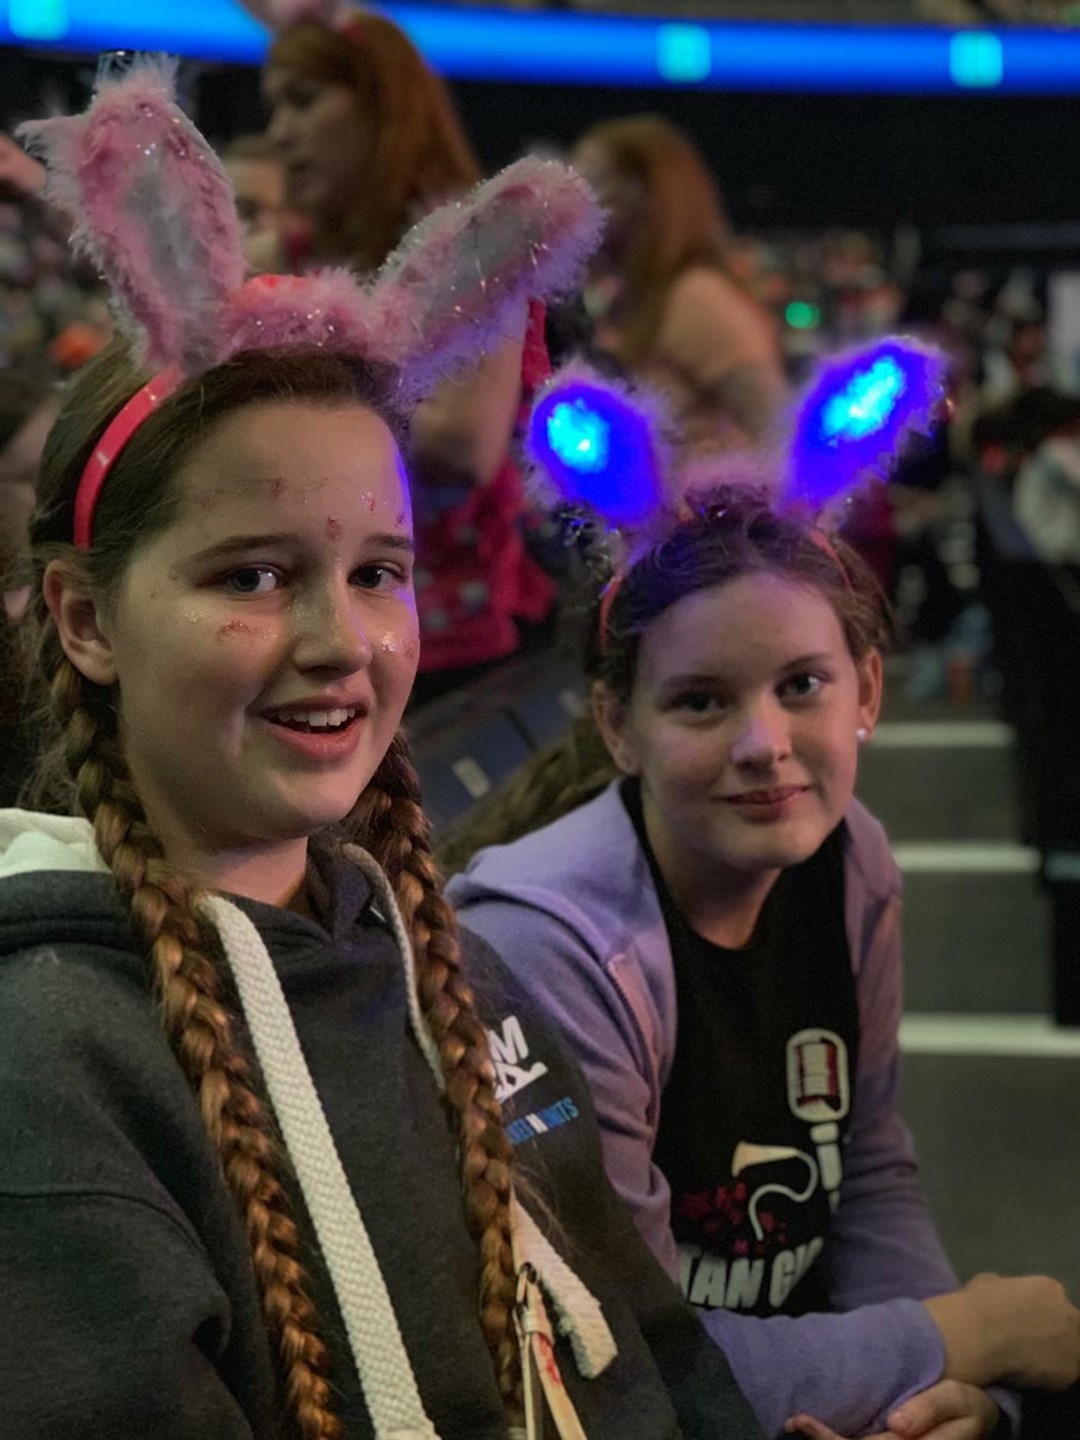 Moray guides at this year's Tartan Gig festival at the Hydro in Glasgow.